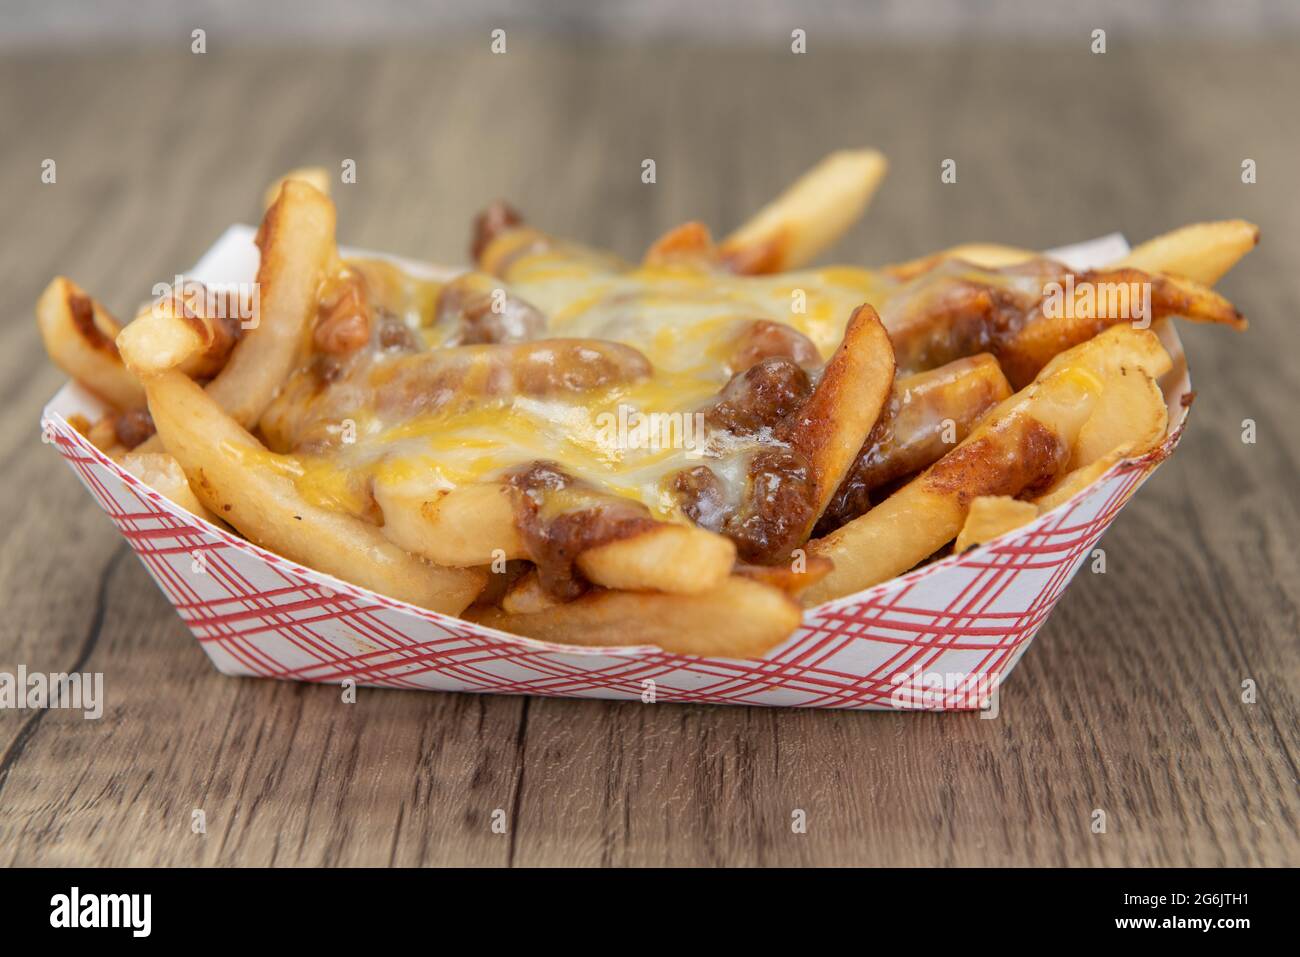 Melted cheese smothers this entire boat of chile cheese french fries as a very filling side dish. Stock Photo